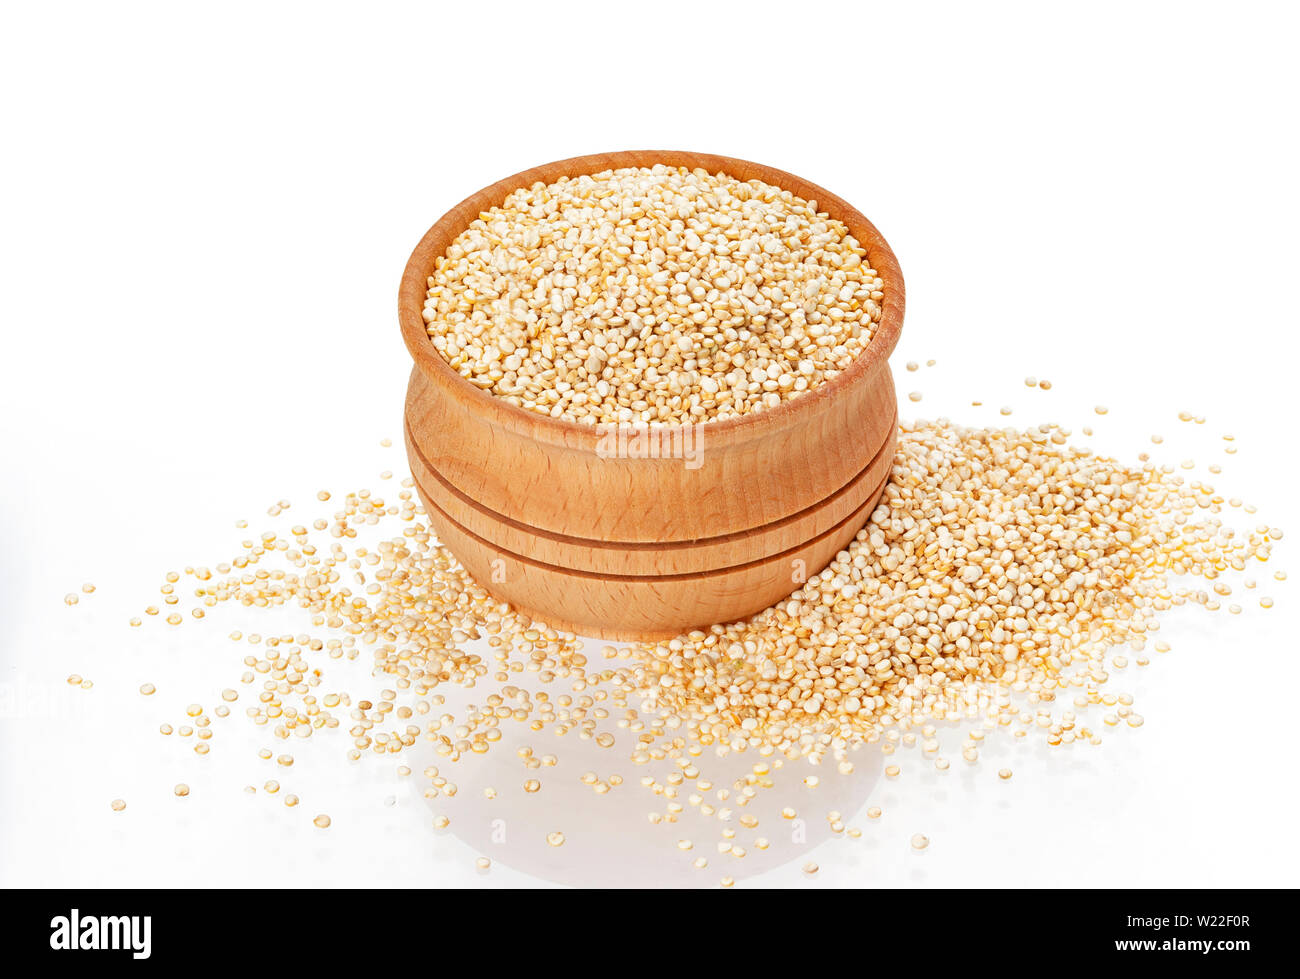 Wooden bowl of quinoa seeds isolated on white background Stock Photo